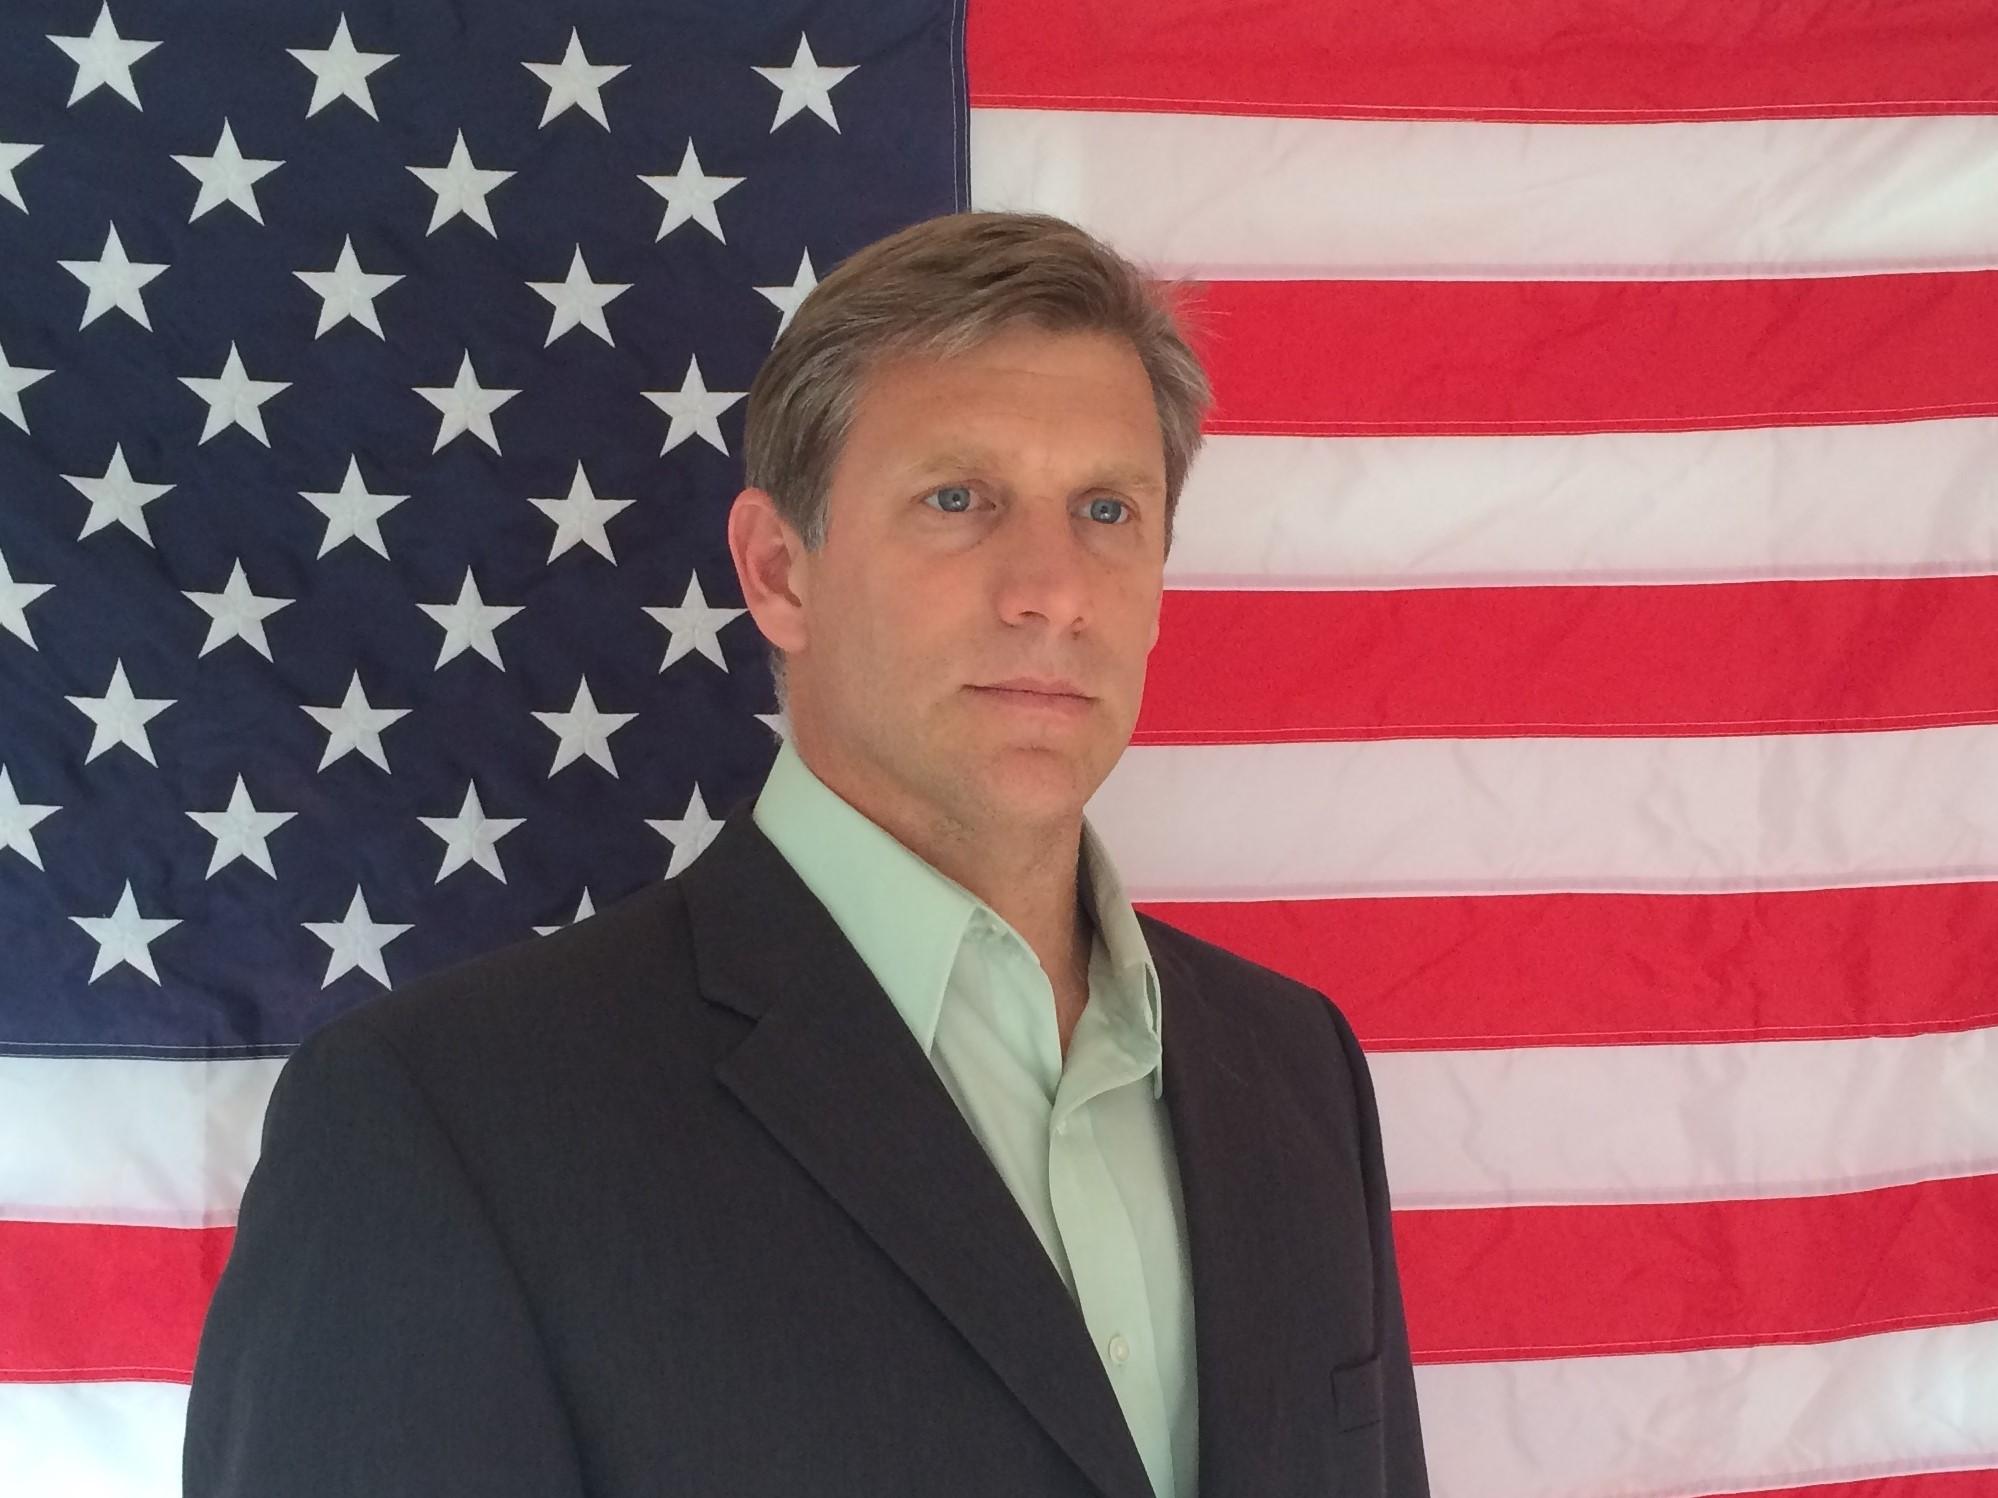 Zoltan Istvan ran in the US presidential elections in 2016 as leader of the Transhumanist Party